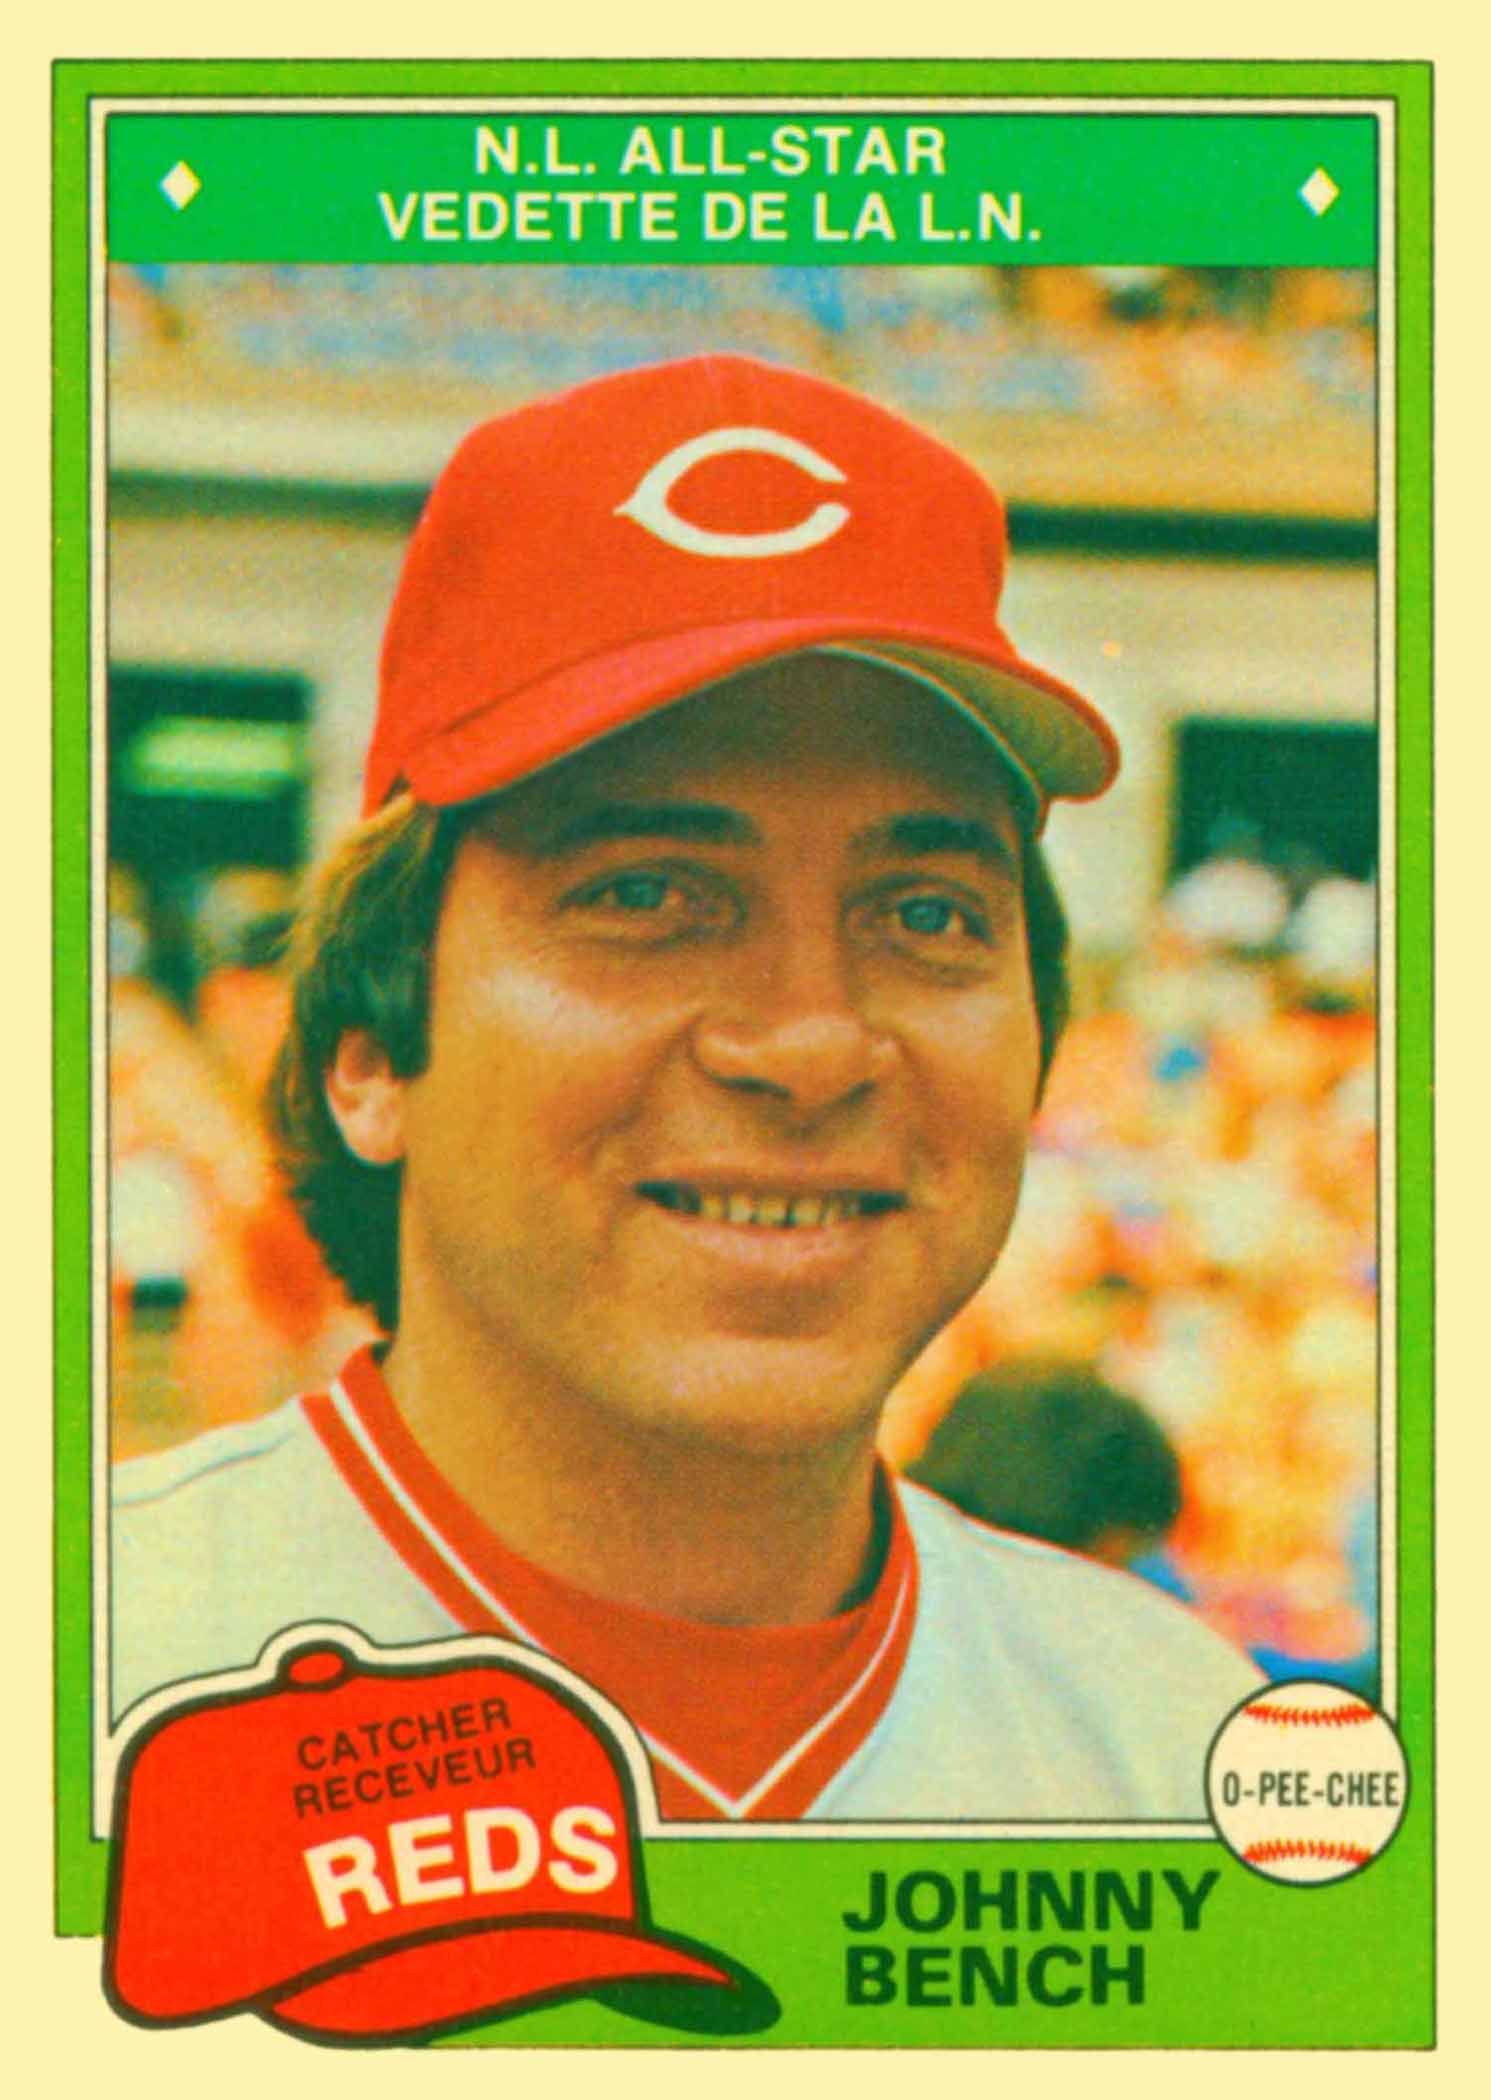 Johnny Bench 1981 Coca Cola Baseball Card as Pictured 